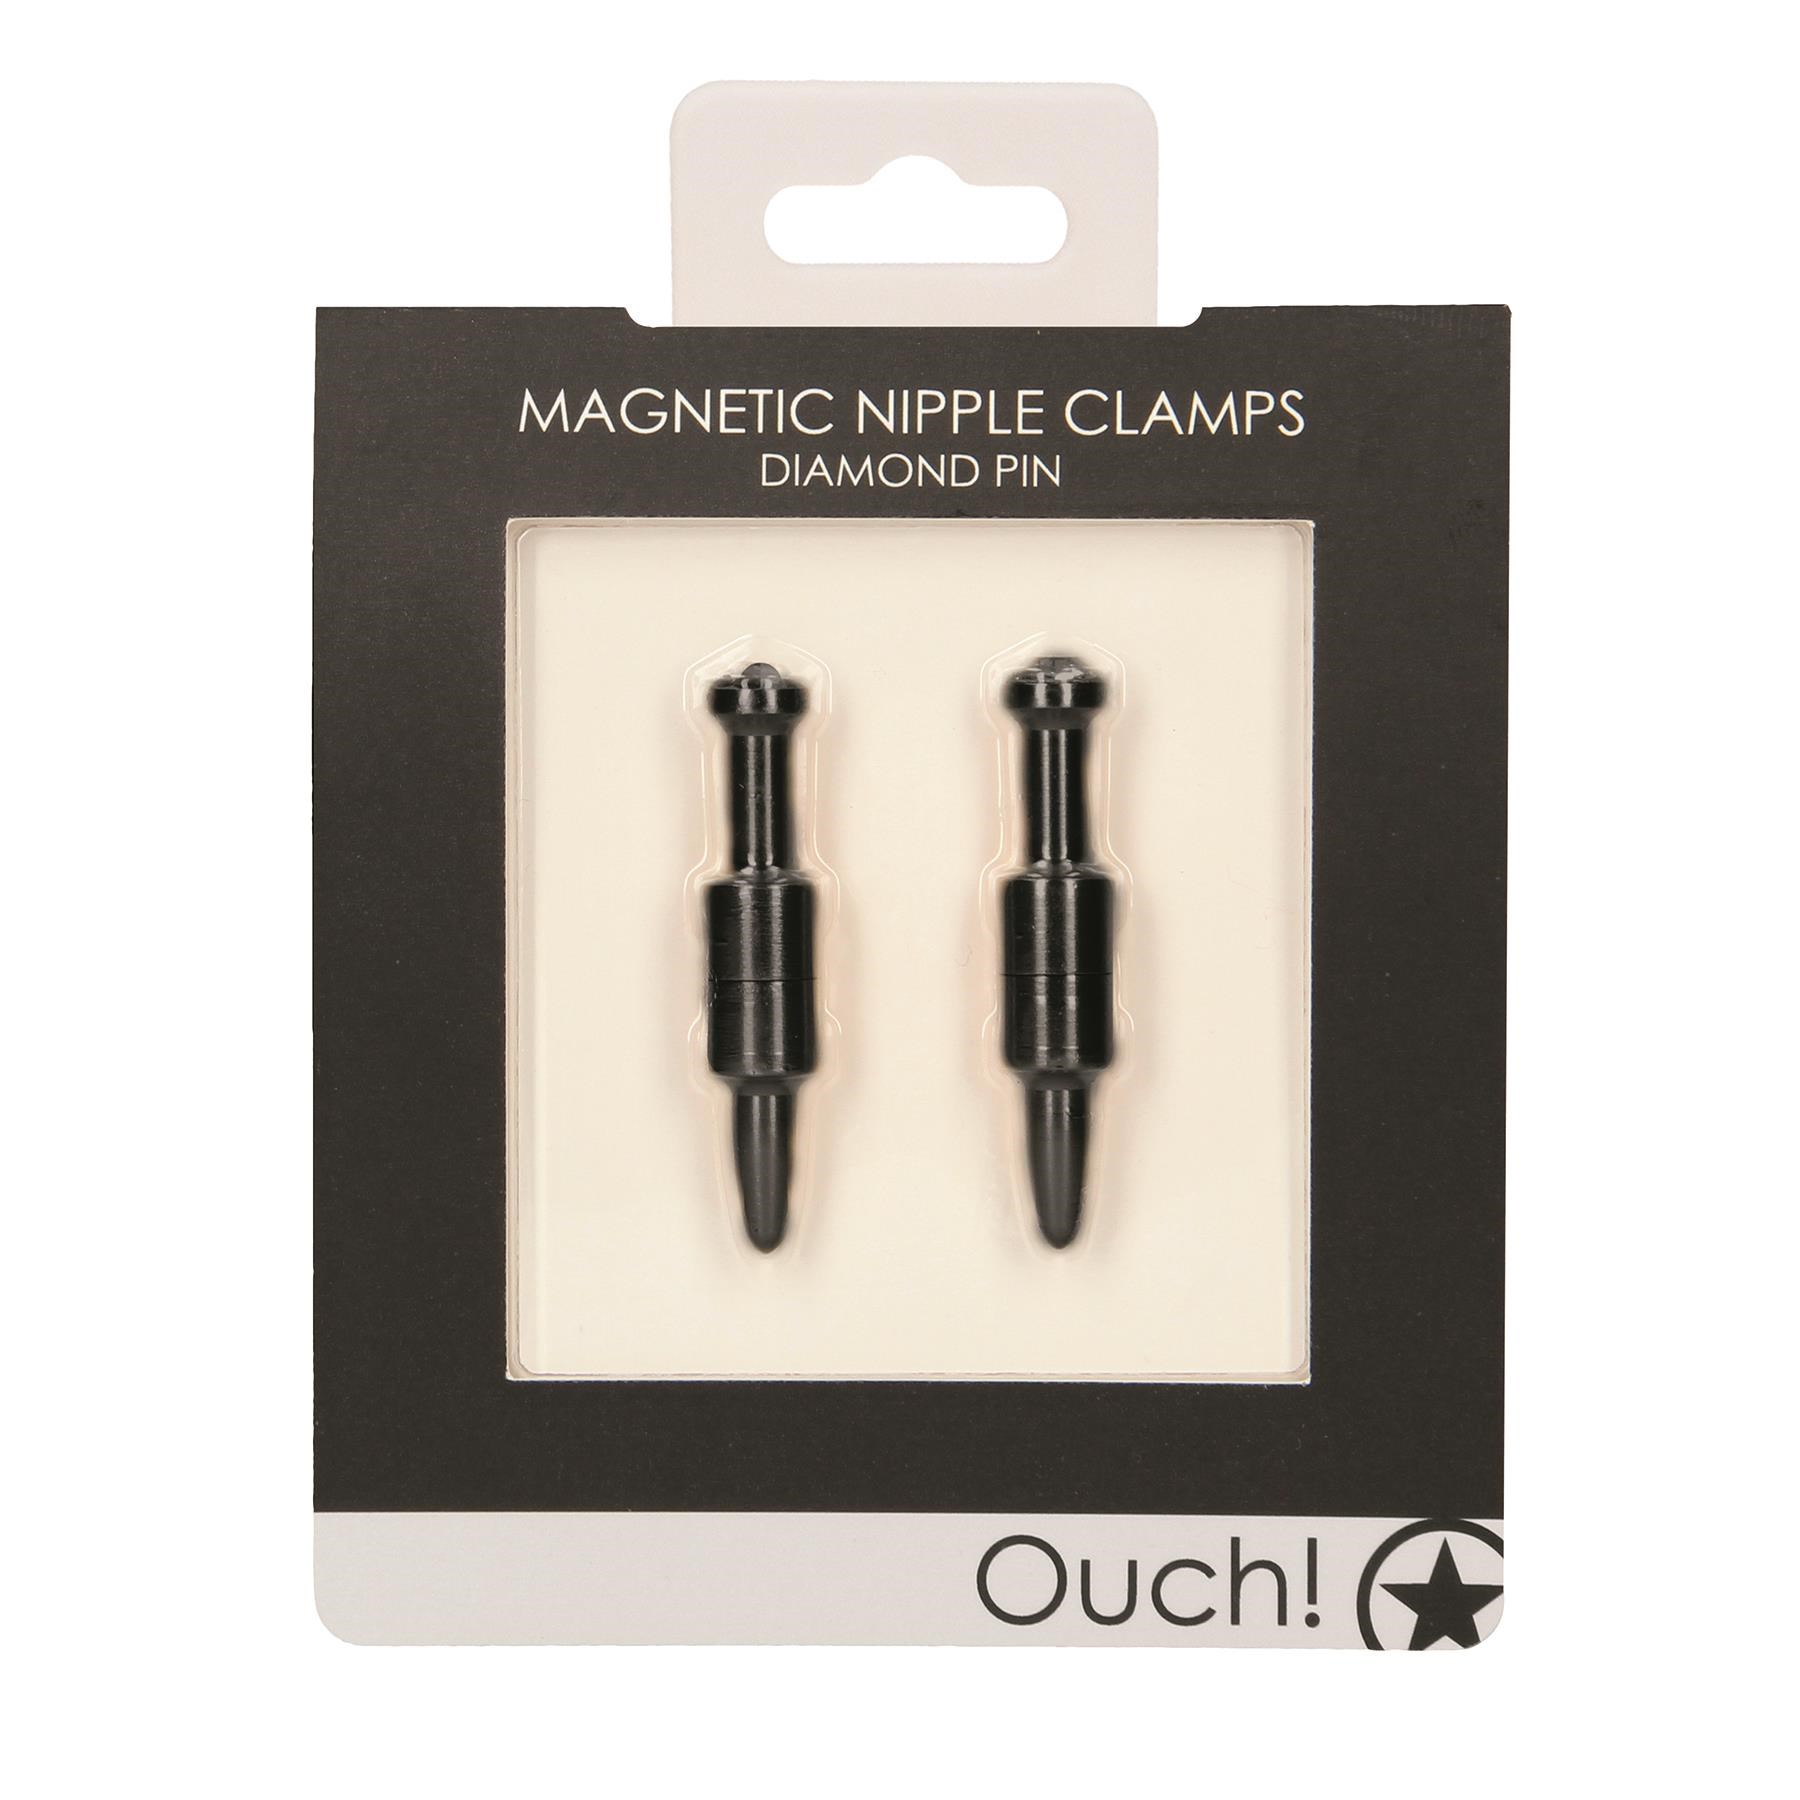 Ouch! Diamond Pin Magnetic Nipple Clamps - Packaging